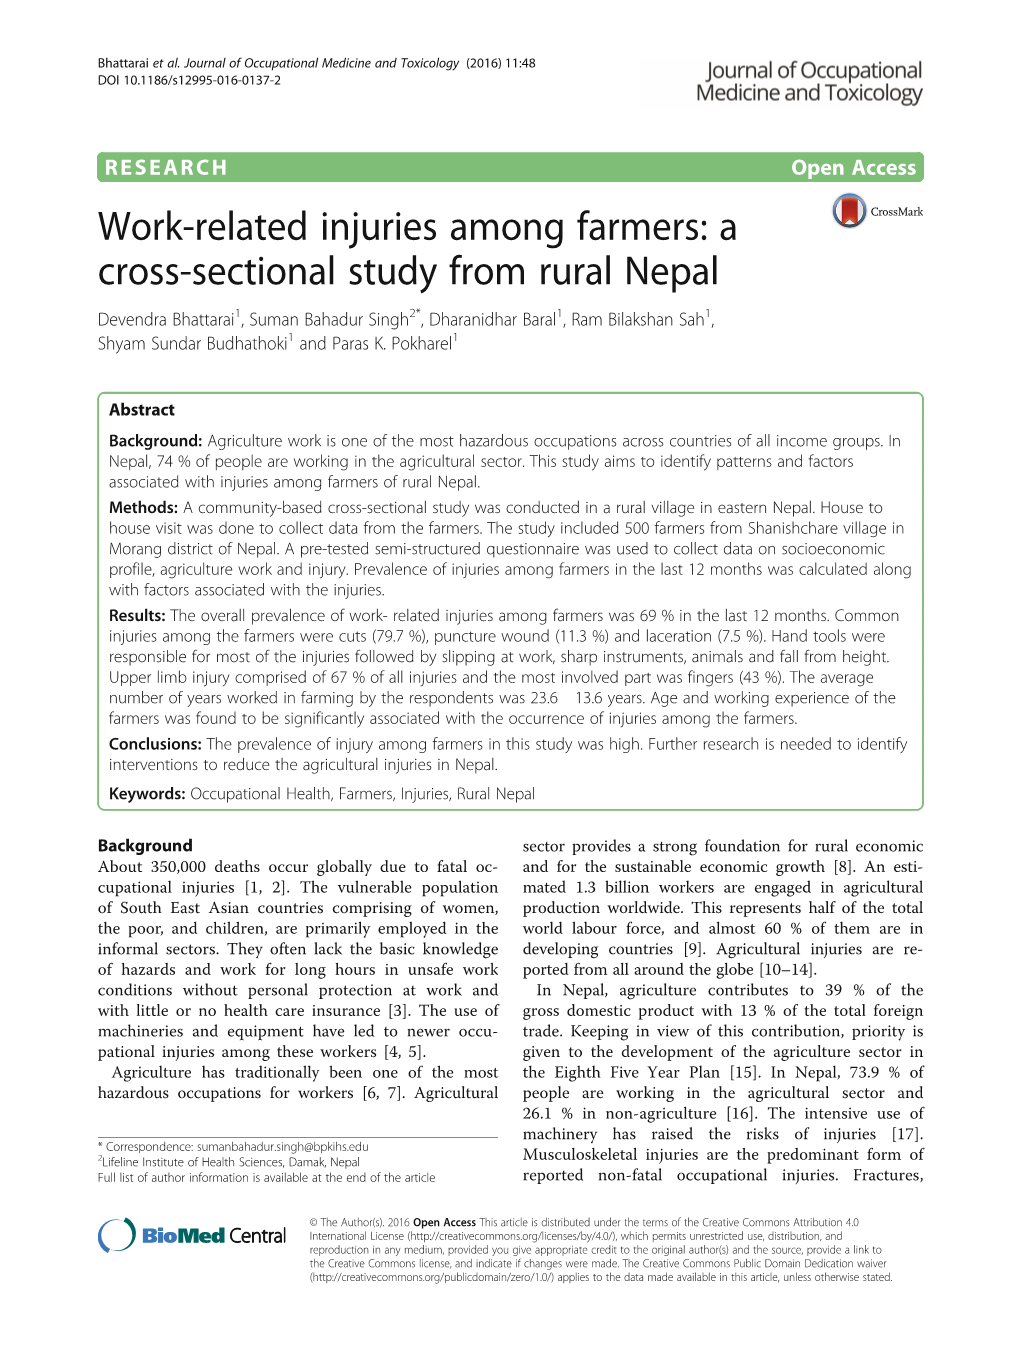 Work-Related Injuries Among Farmers